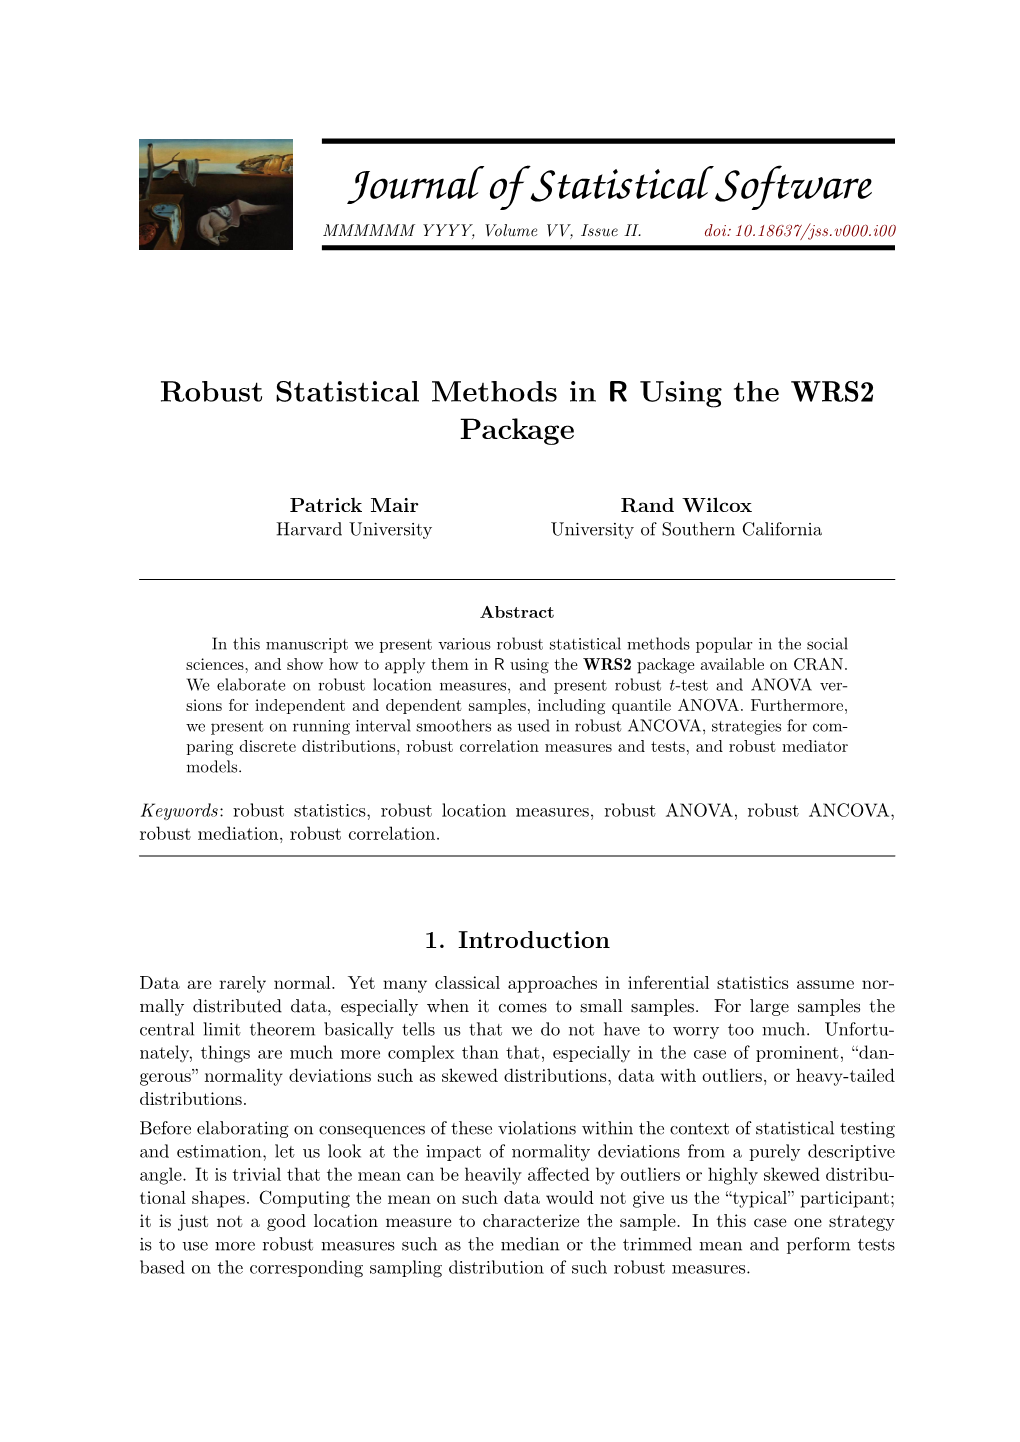 Robust Statistical Methods in R Using the WRS2 Package